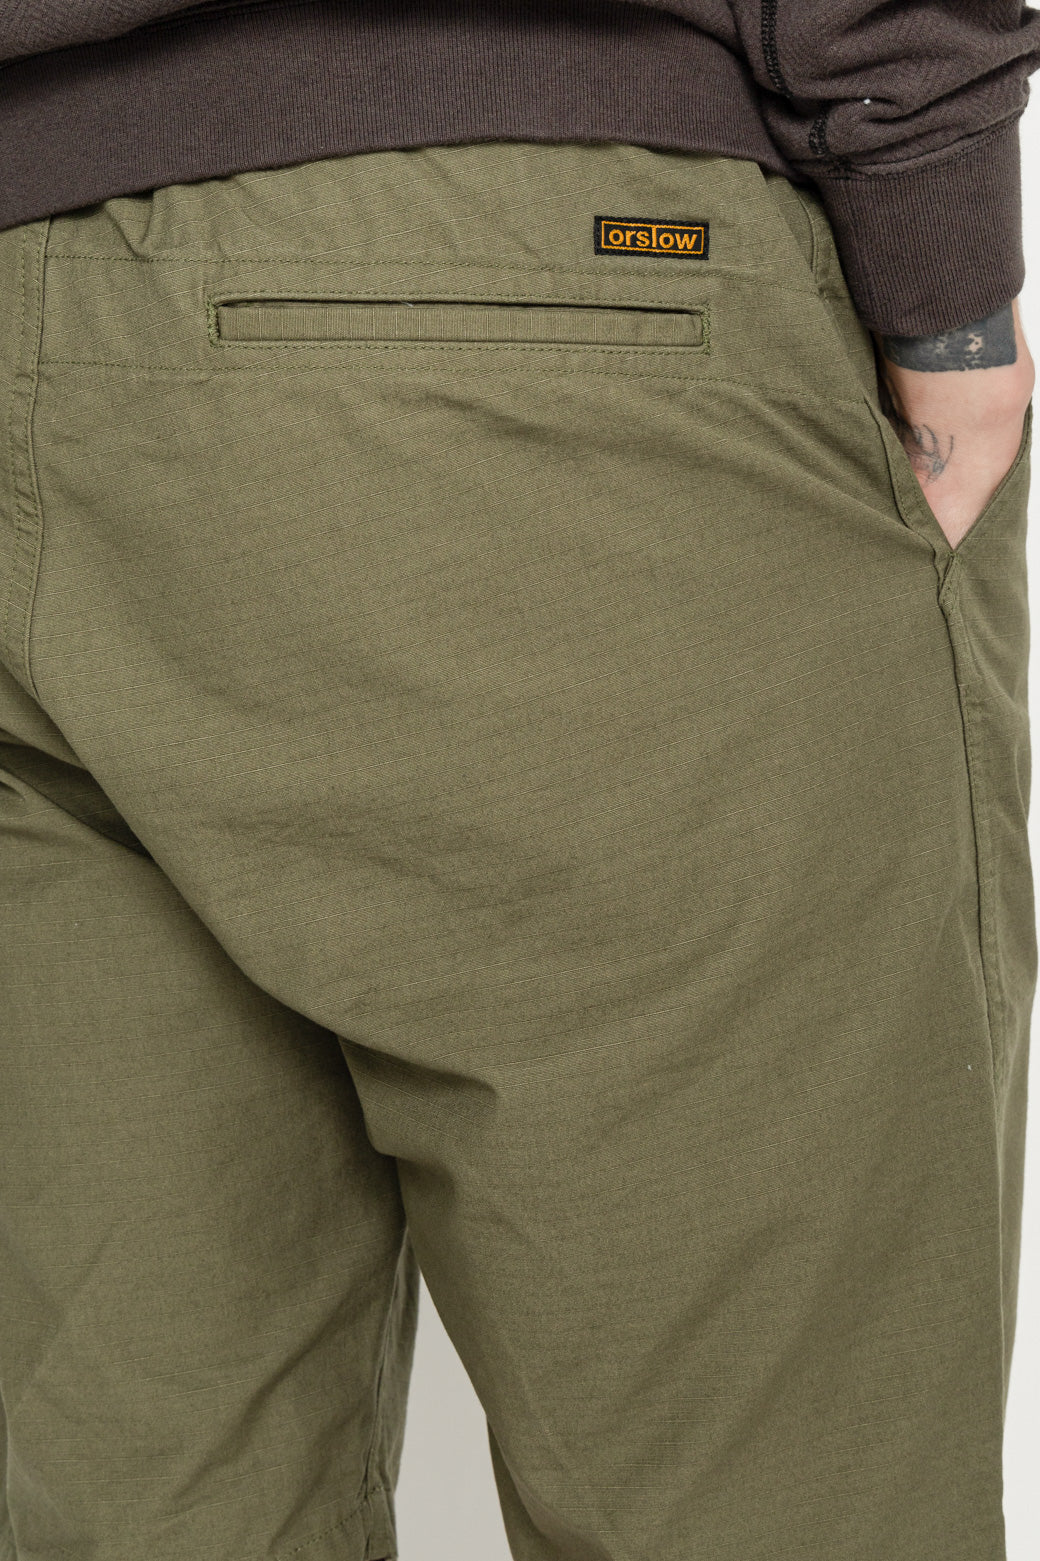 New Yorker Shorts - Army Green